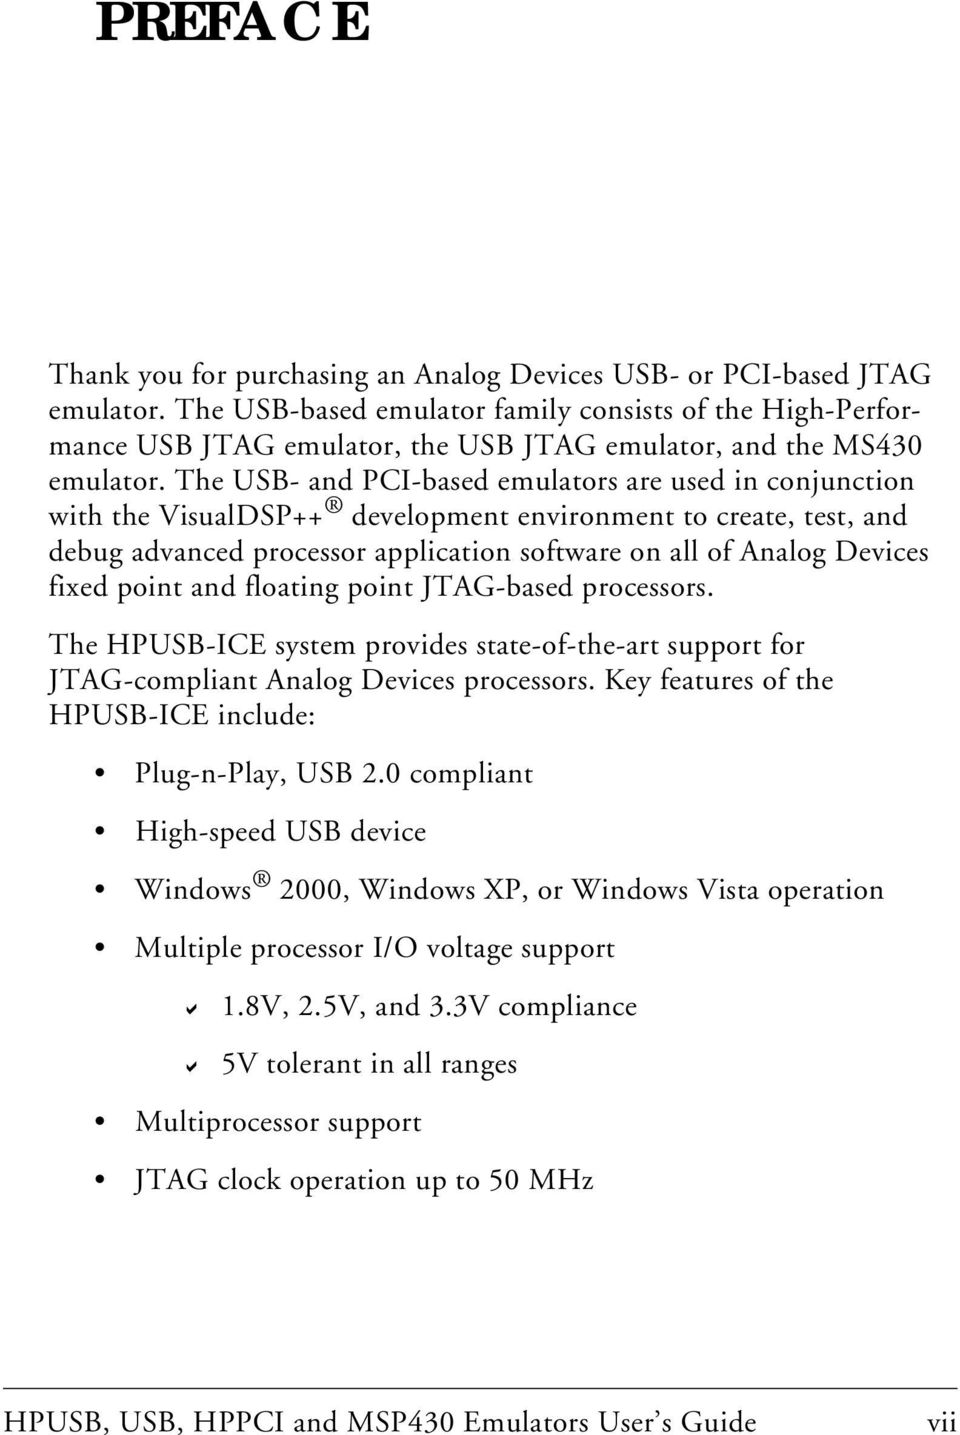 The USB- and PCI-based emulators are used in conjunction with the VisualDSP++ development environment to create, test, and debug advanced processor application software on all of Analog Devices fixed